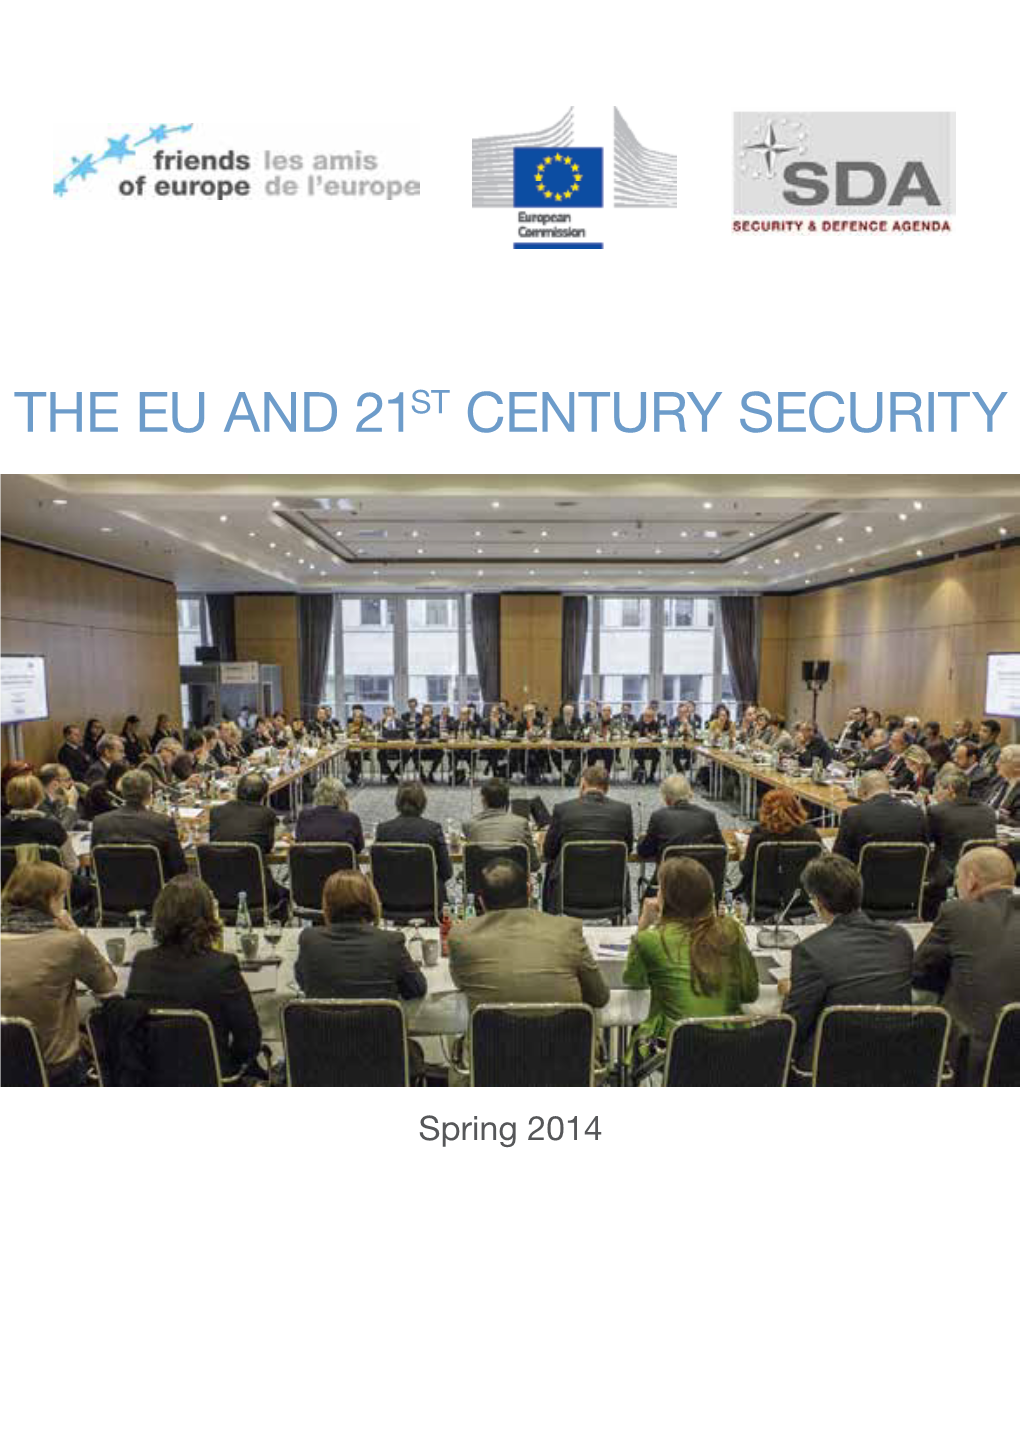 The Eu and 21ST CENTURY SECURITY